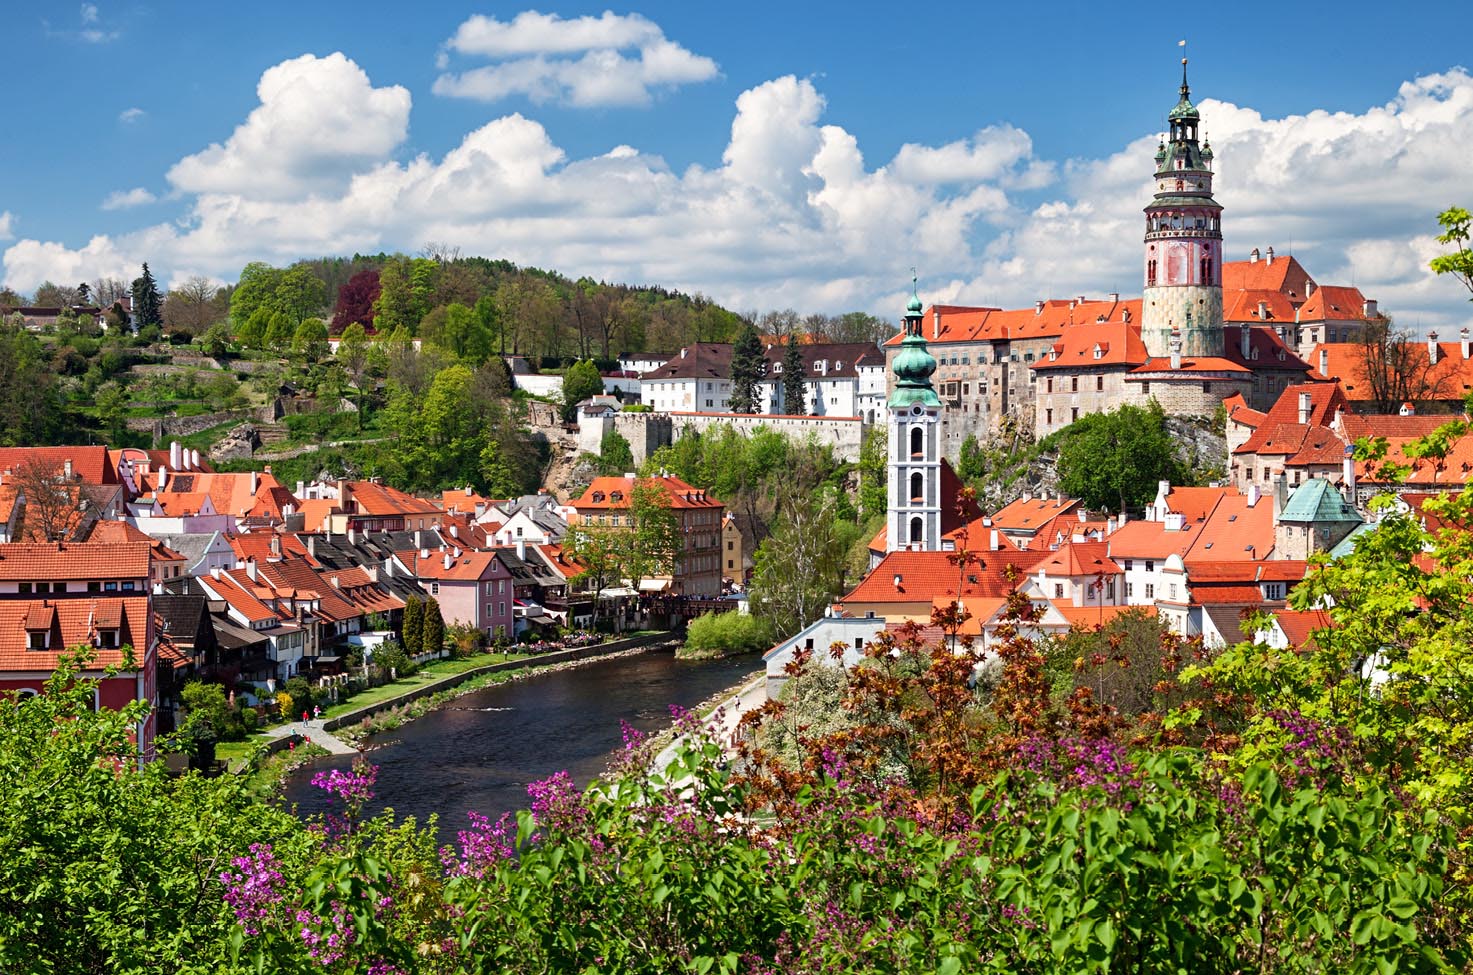 Cesky Krumlov, with white, orange-roofed buildings, trees, and blue cloudy sky